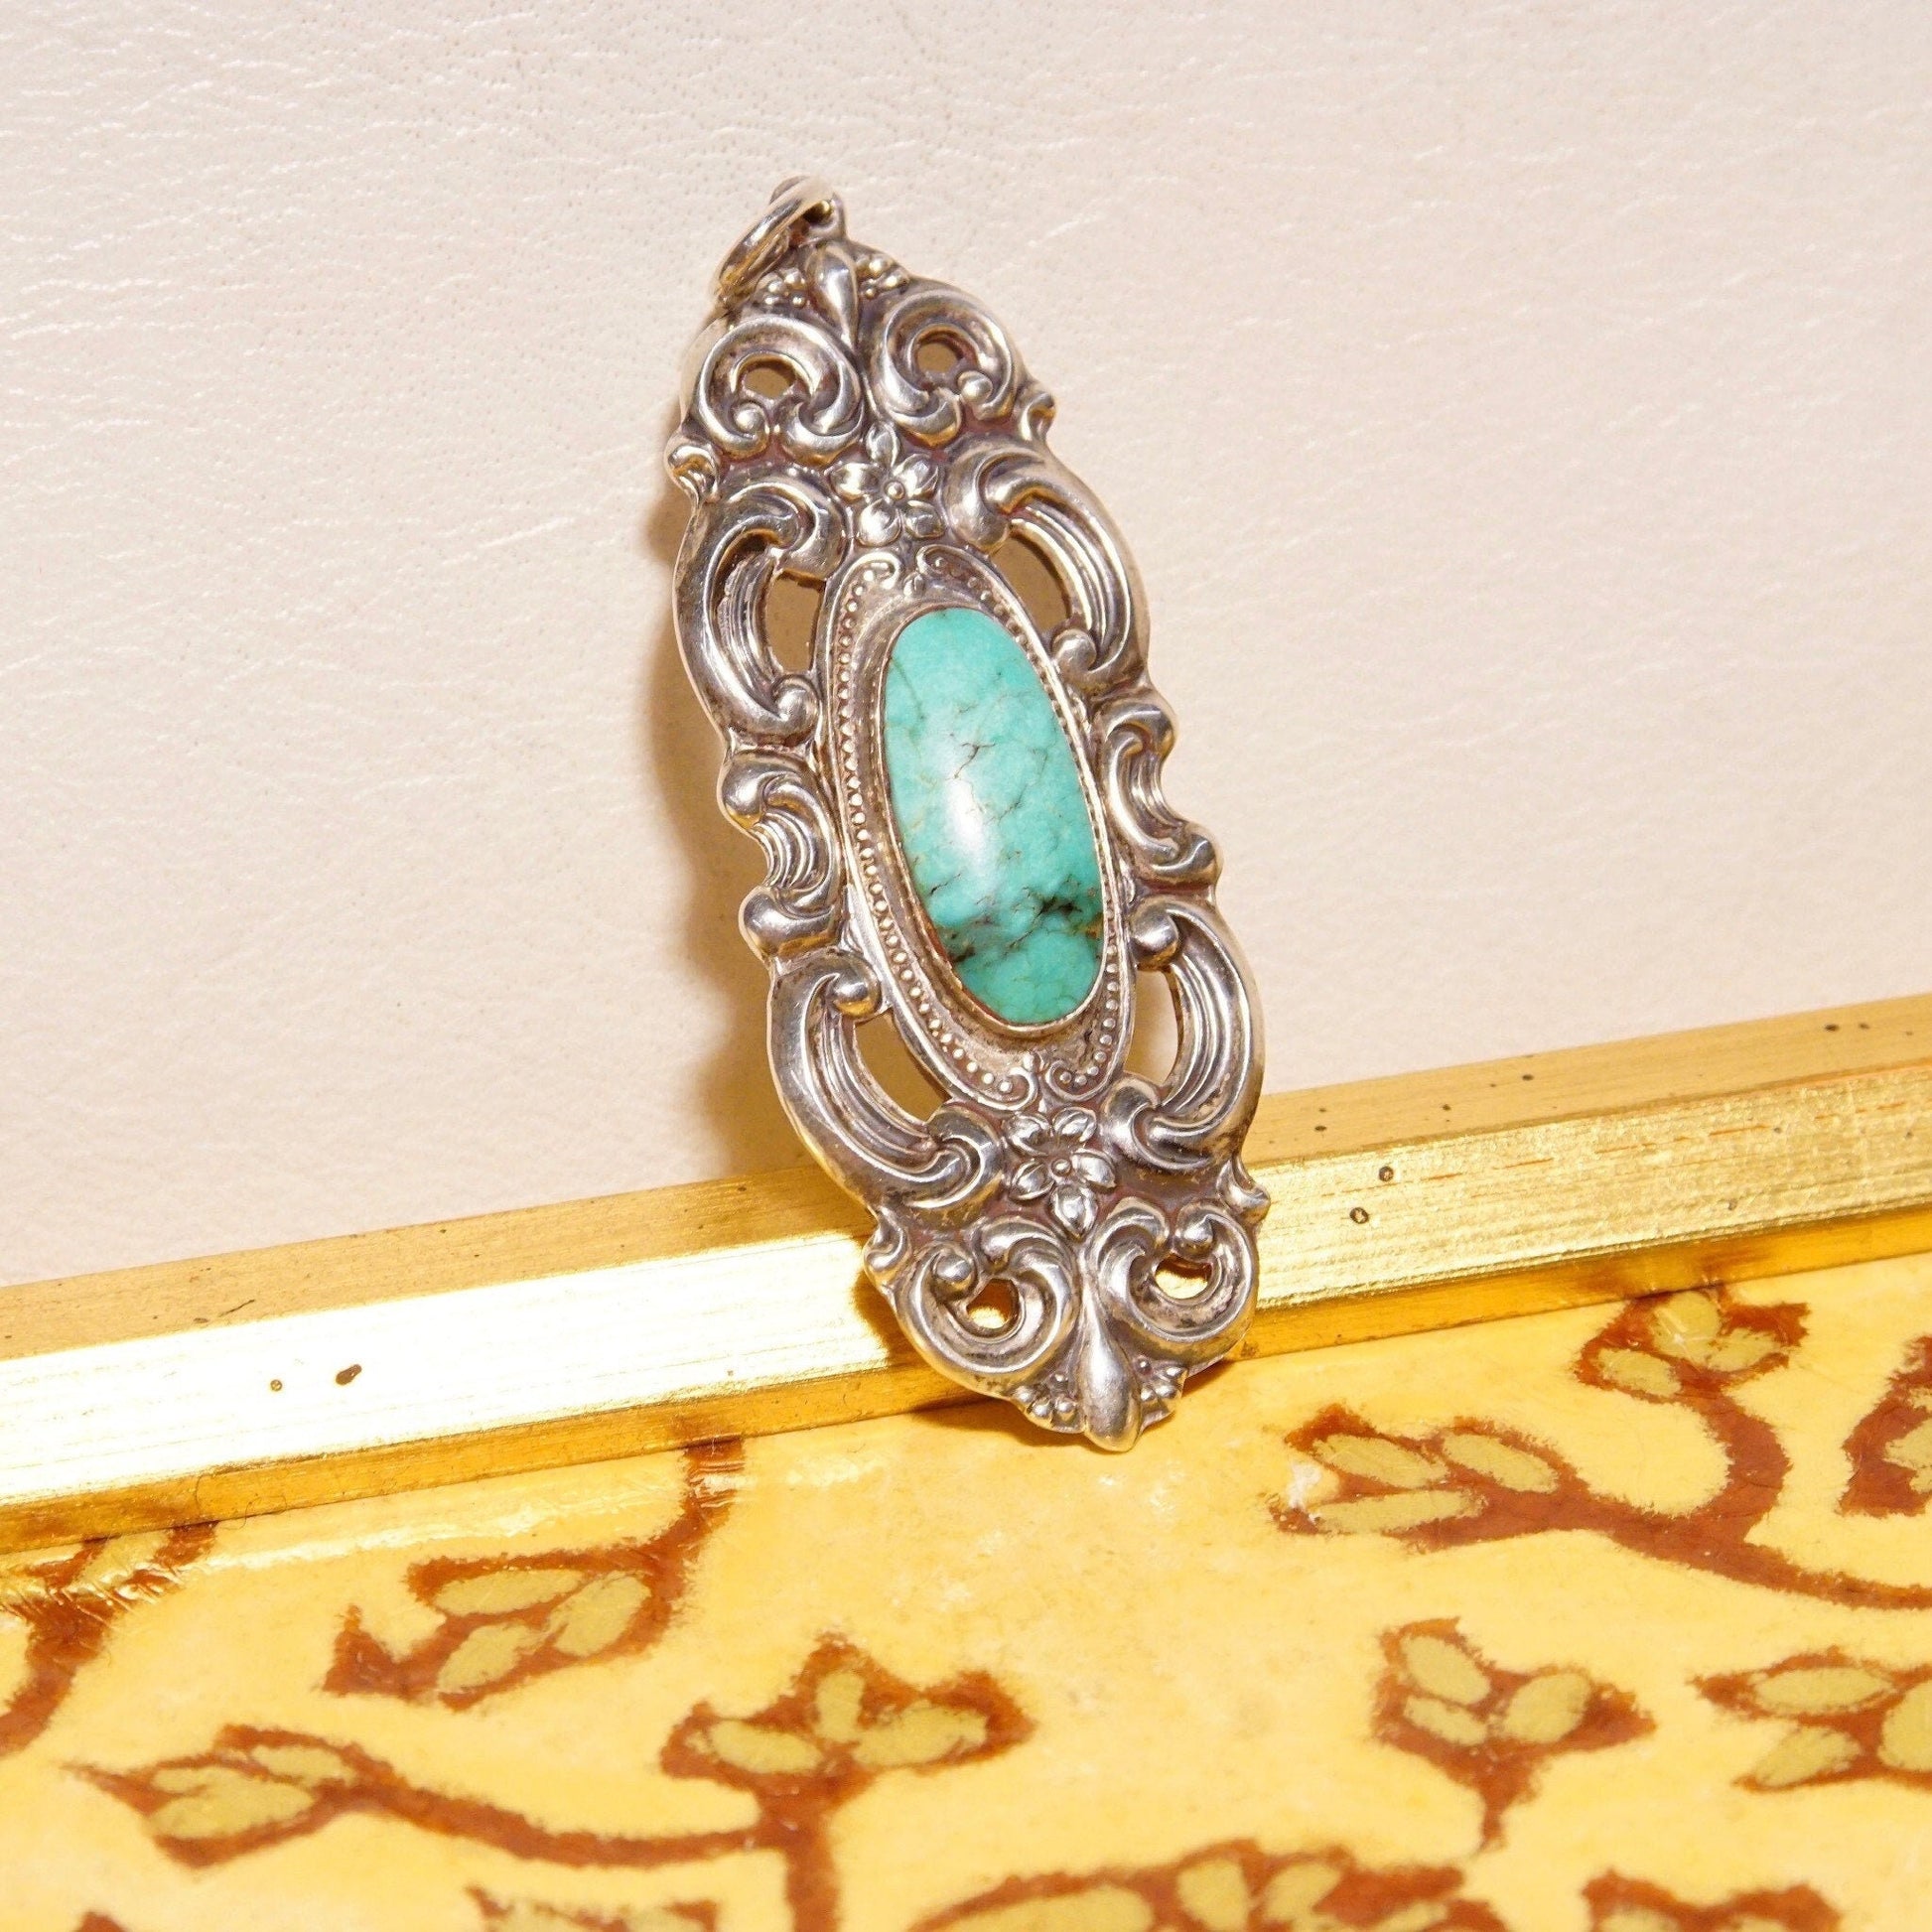 Vintage Towle sterling silver pendant with ornate embossed repousse designs, featuring a turquoise cabochon at the center. The pendant has an Art Nouveau style with intricate floral motifs and measures 2 3/4 inches in length.